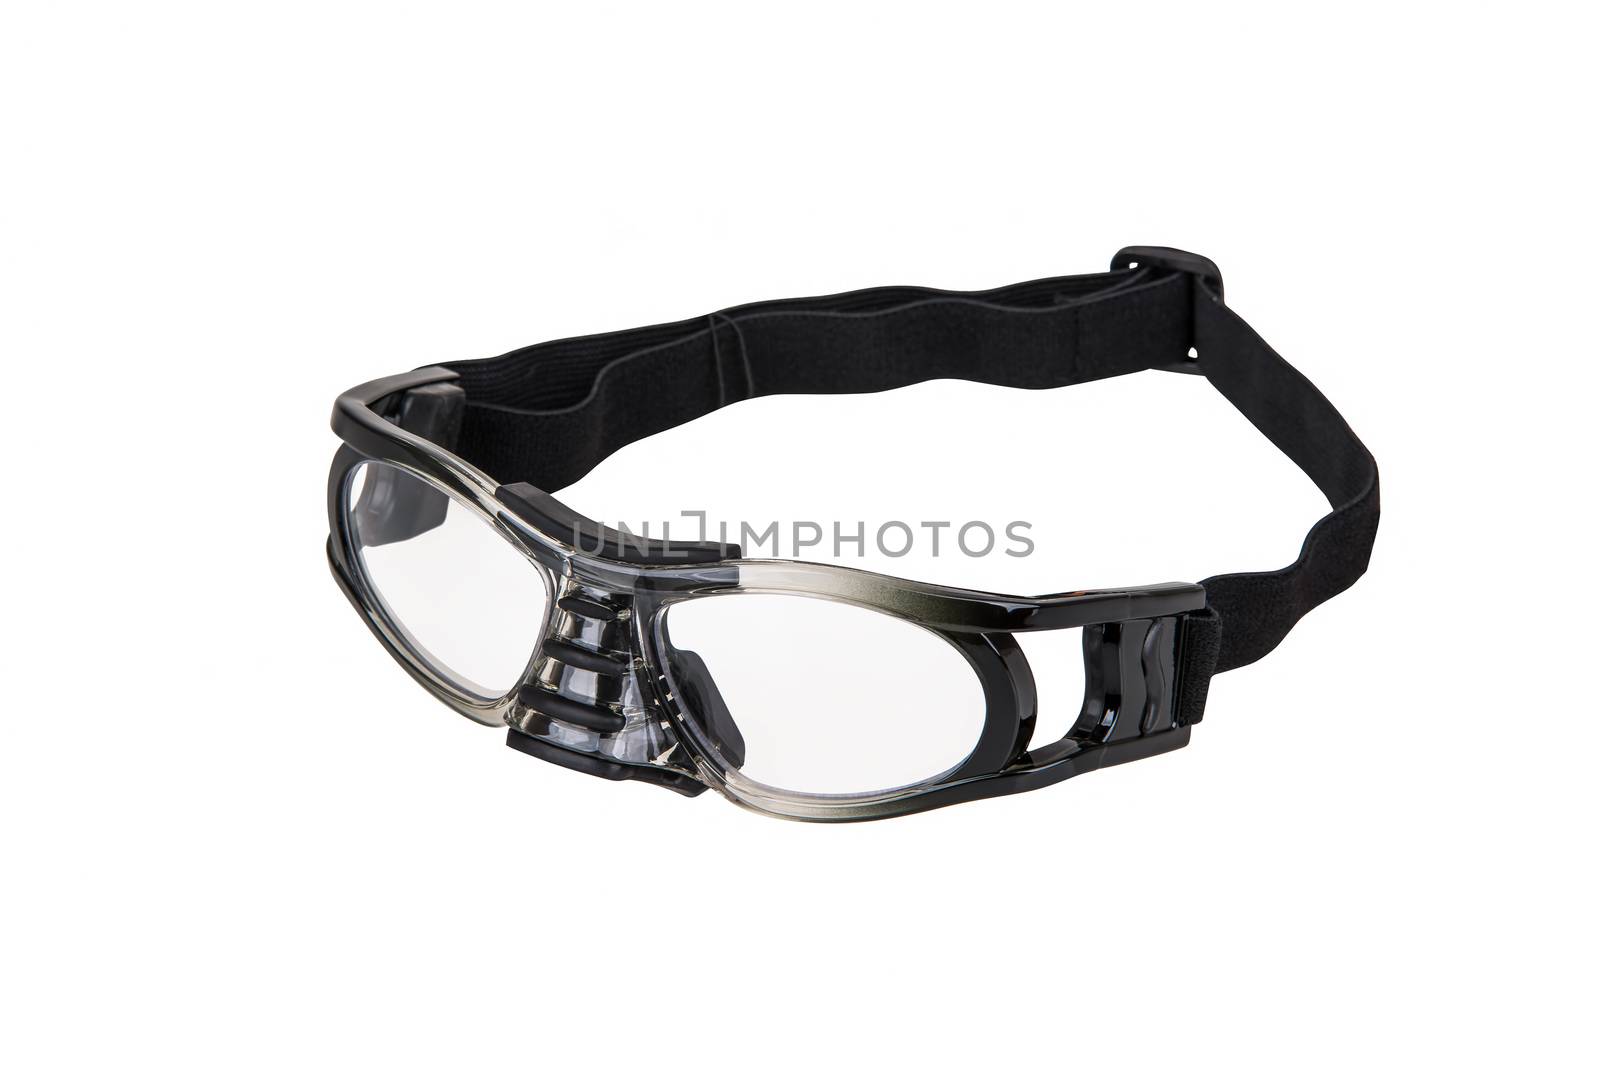 Sport glasses on perfectly white background